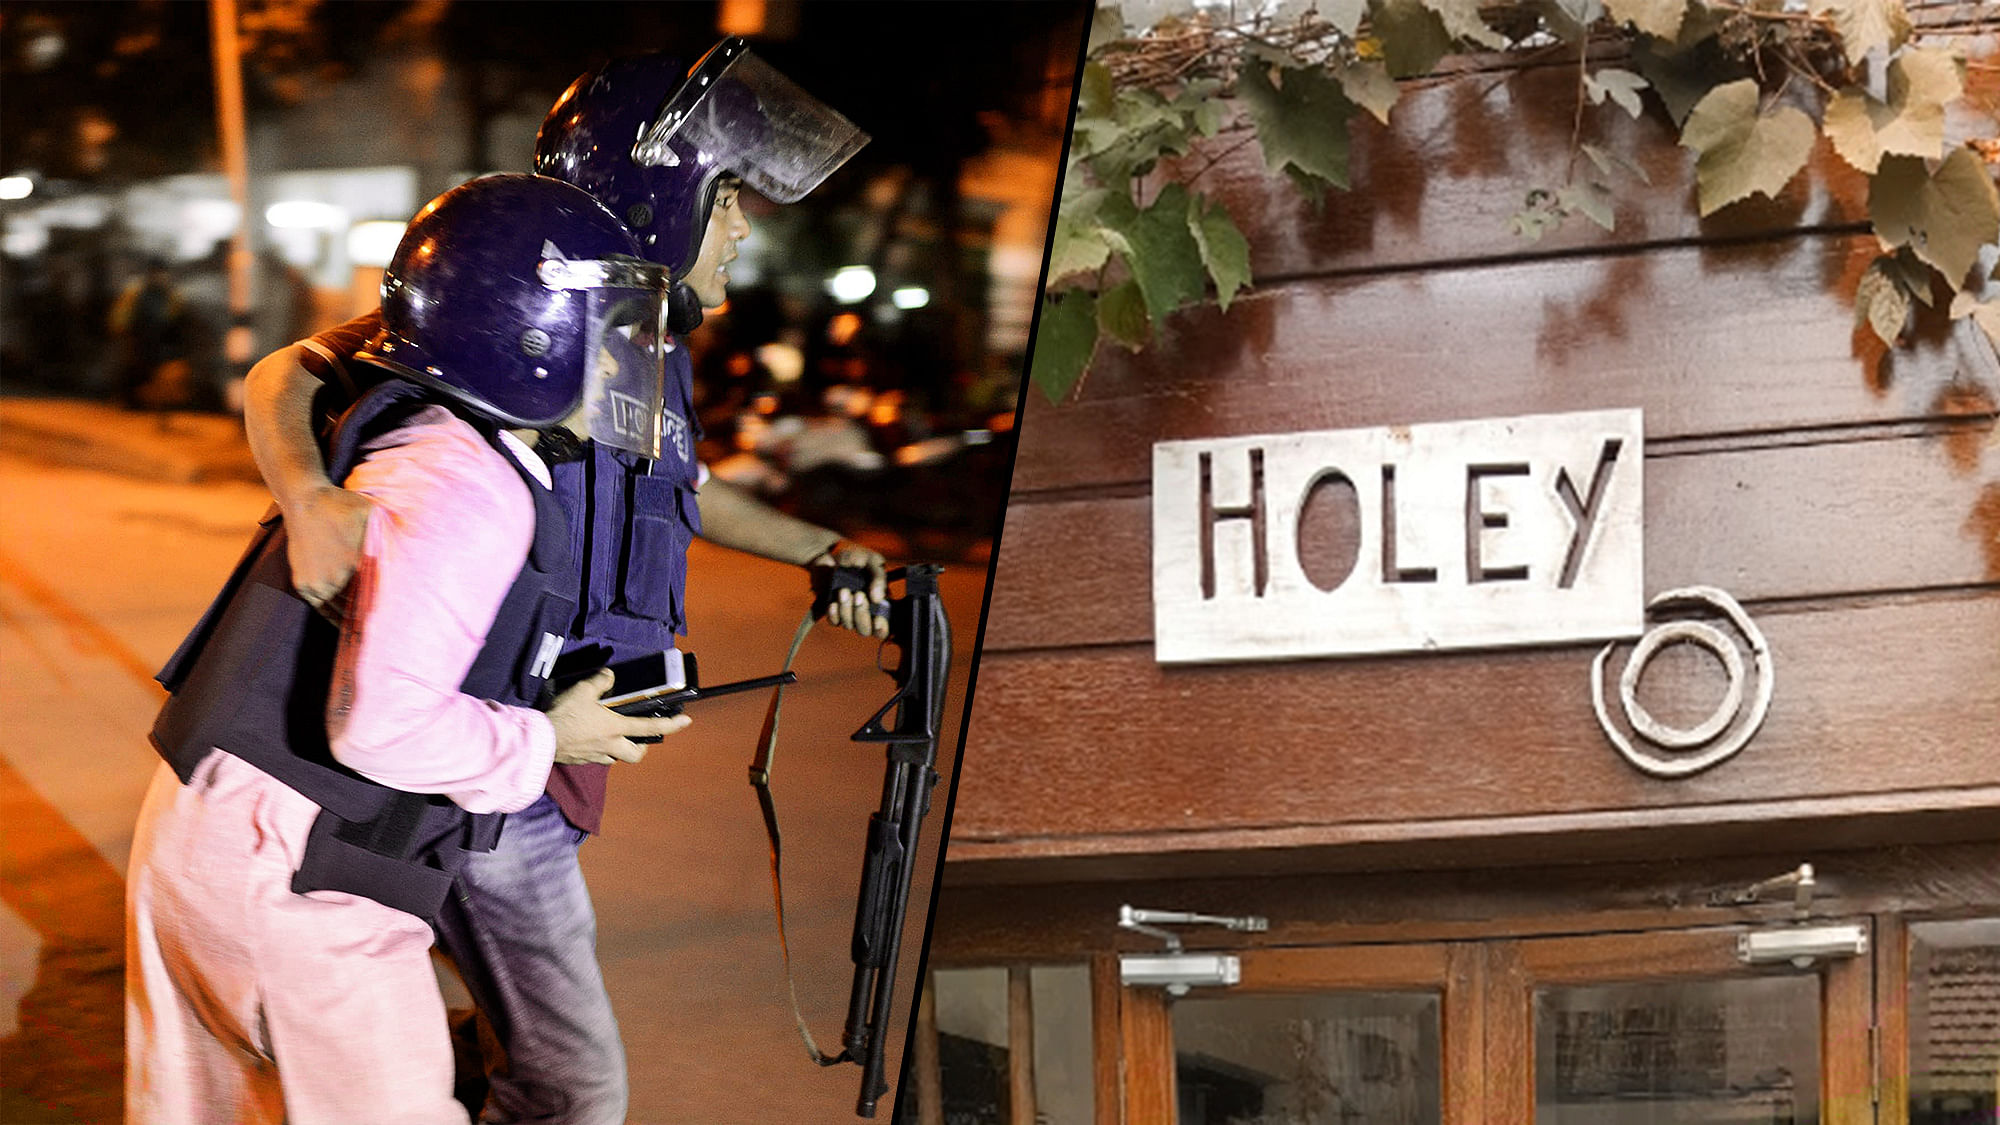 For many, the Holey Artisan Bakery was a symbol of a more cosmopolitan future. (Photo: Altered by <b>The Quint</b>)